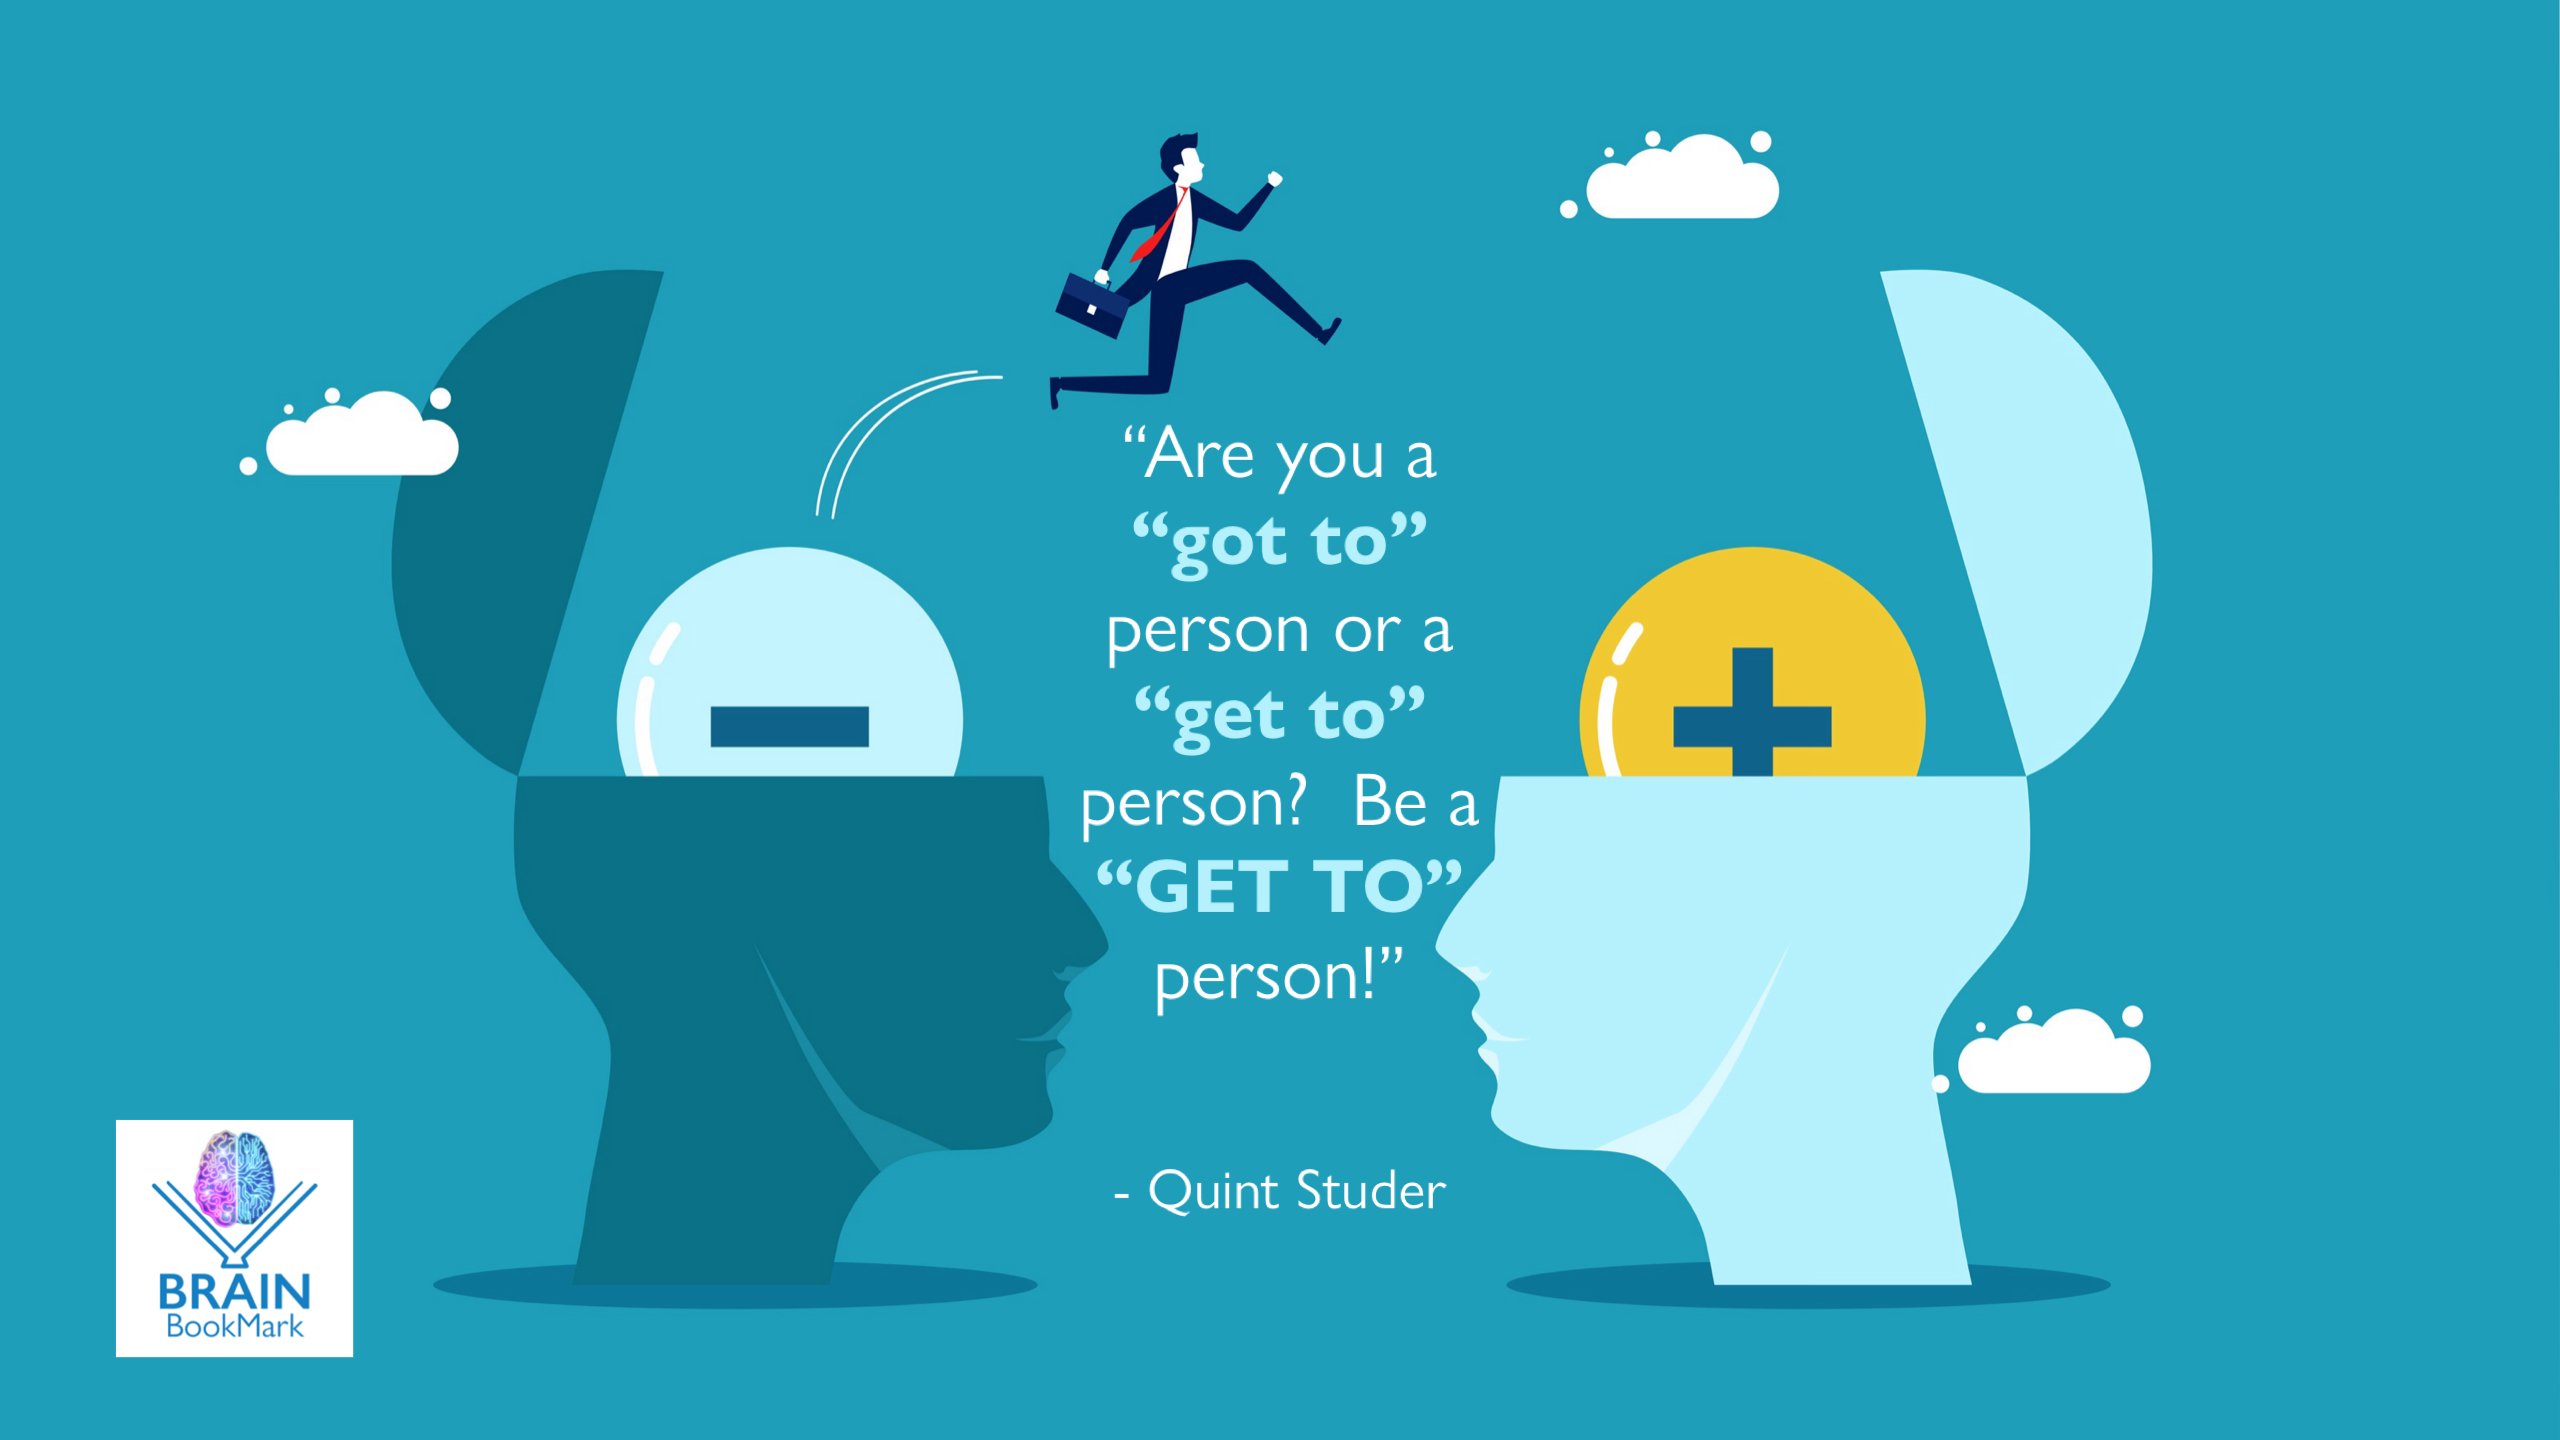 Are you a "got to" person or a "get to" person? Be a "Get To" person!" - Quint Studer